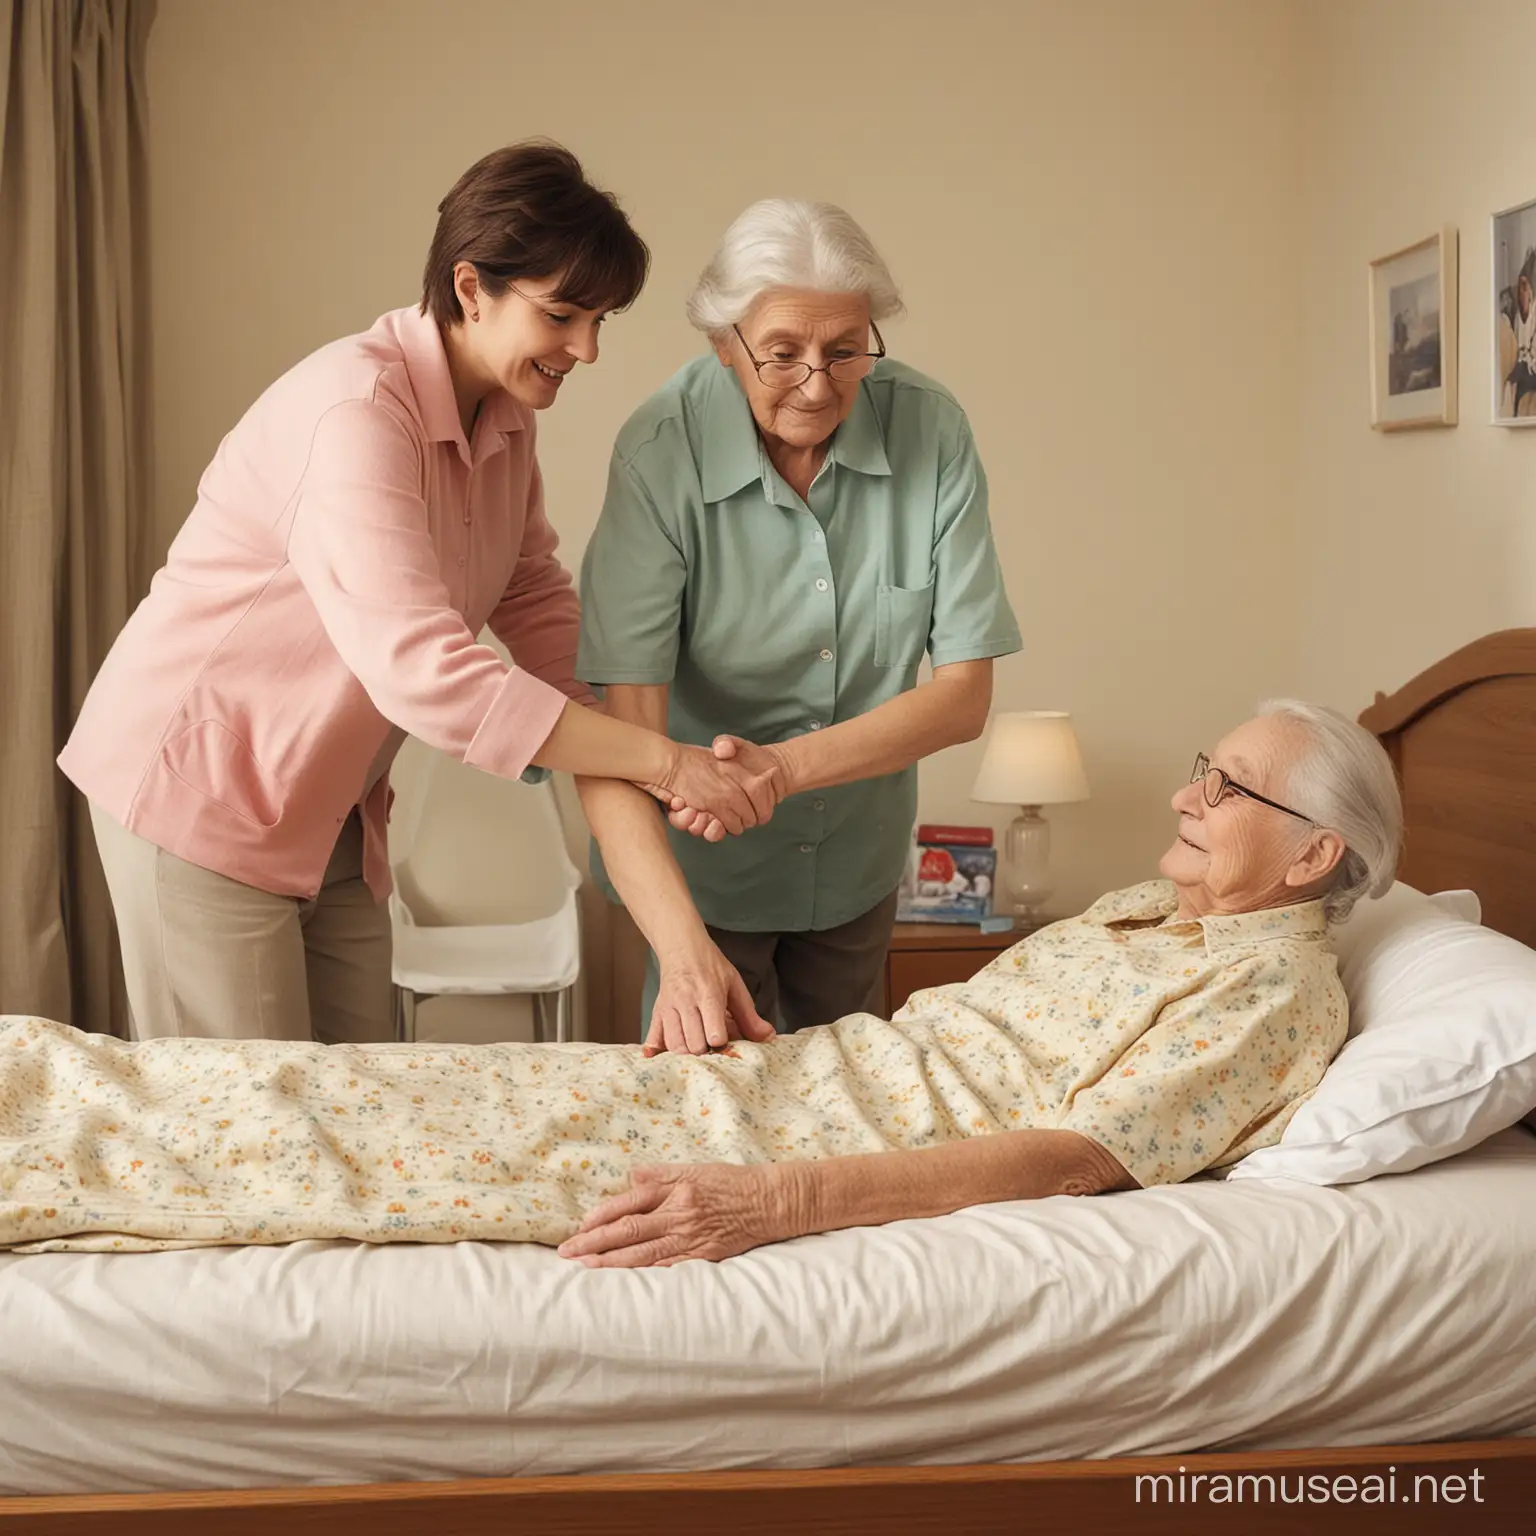 Elderly Assistance Young Caregiver Helping Senior in Room